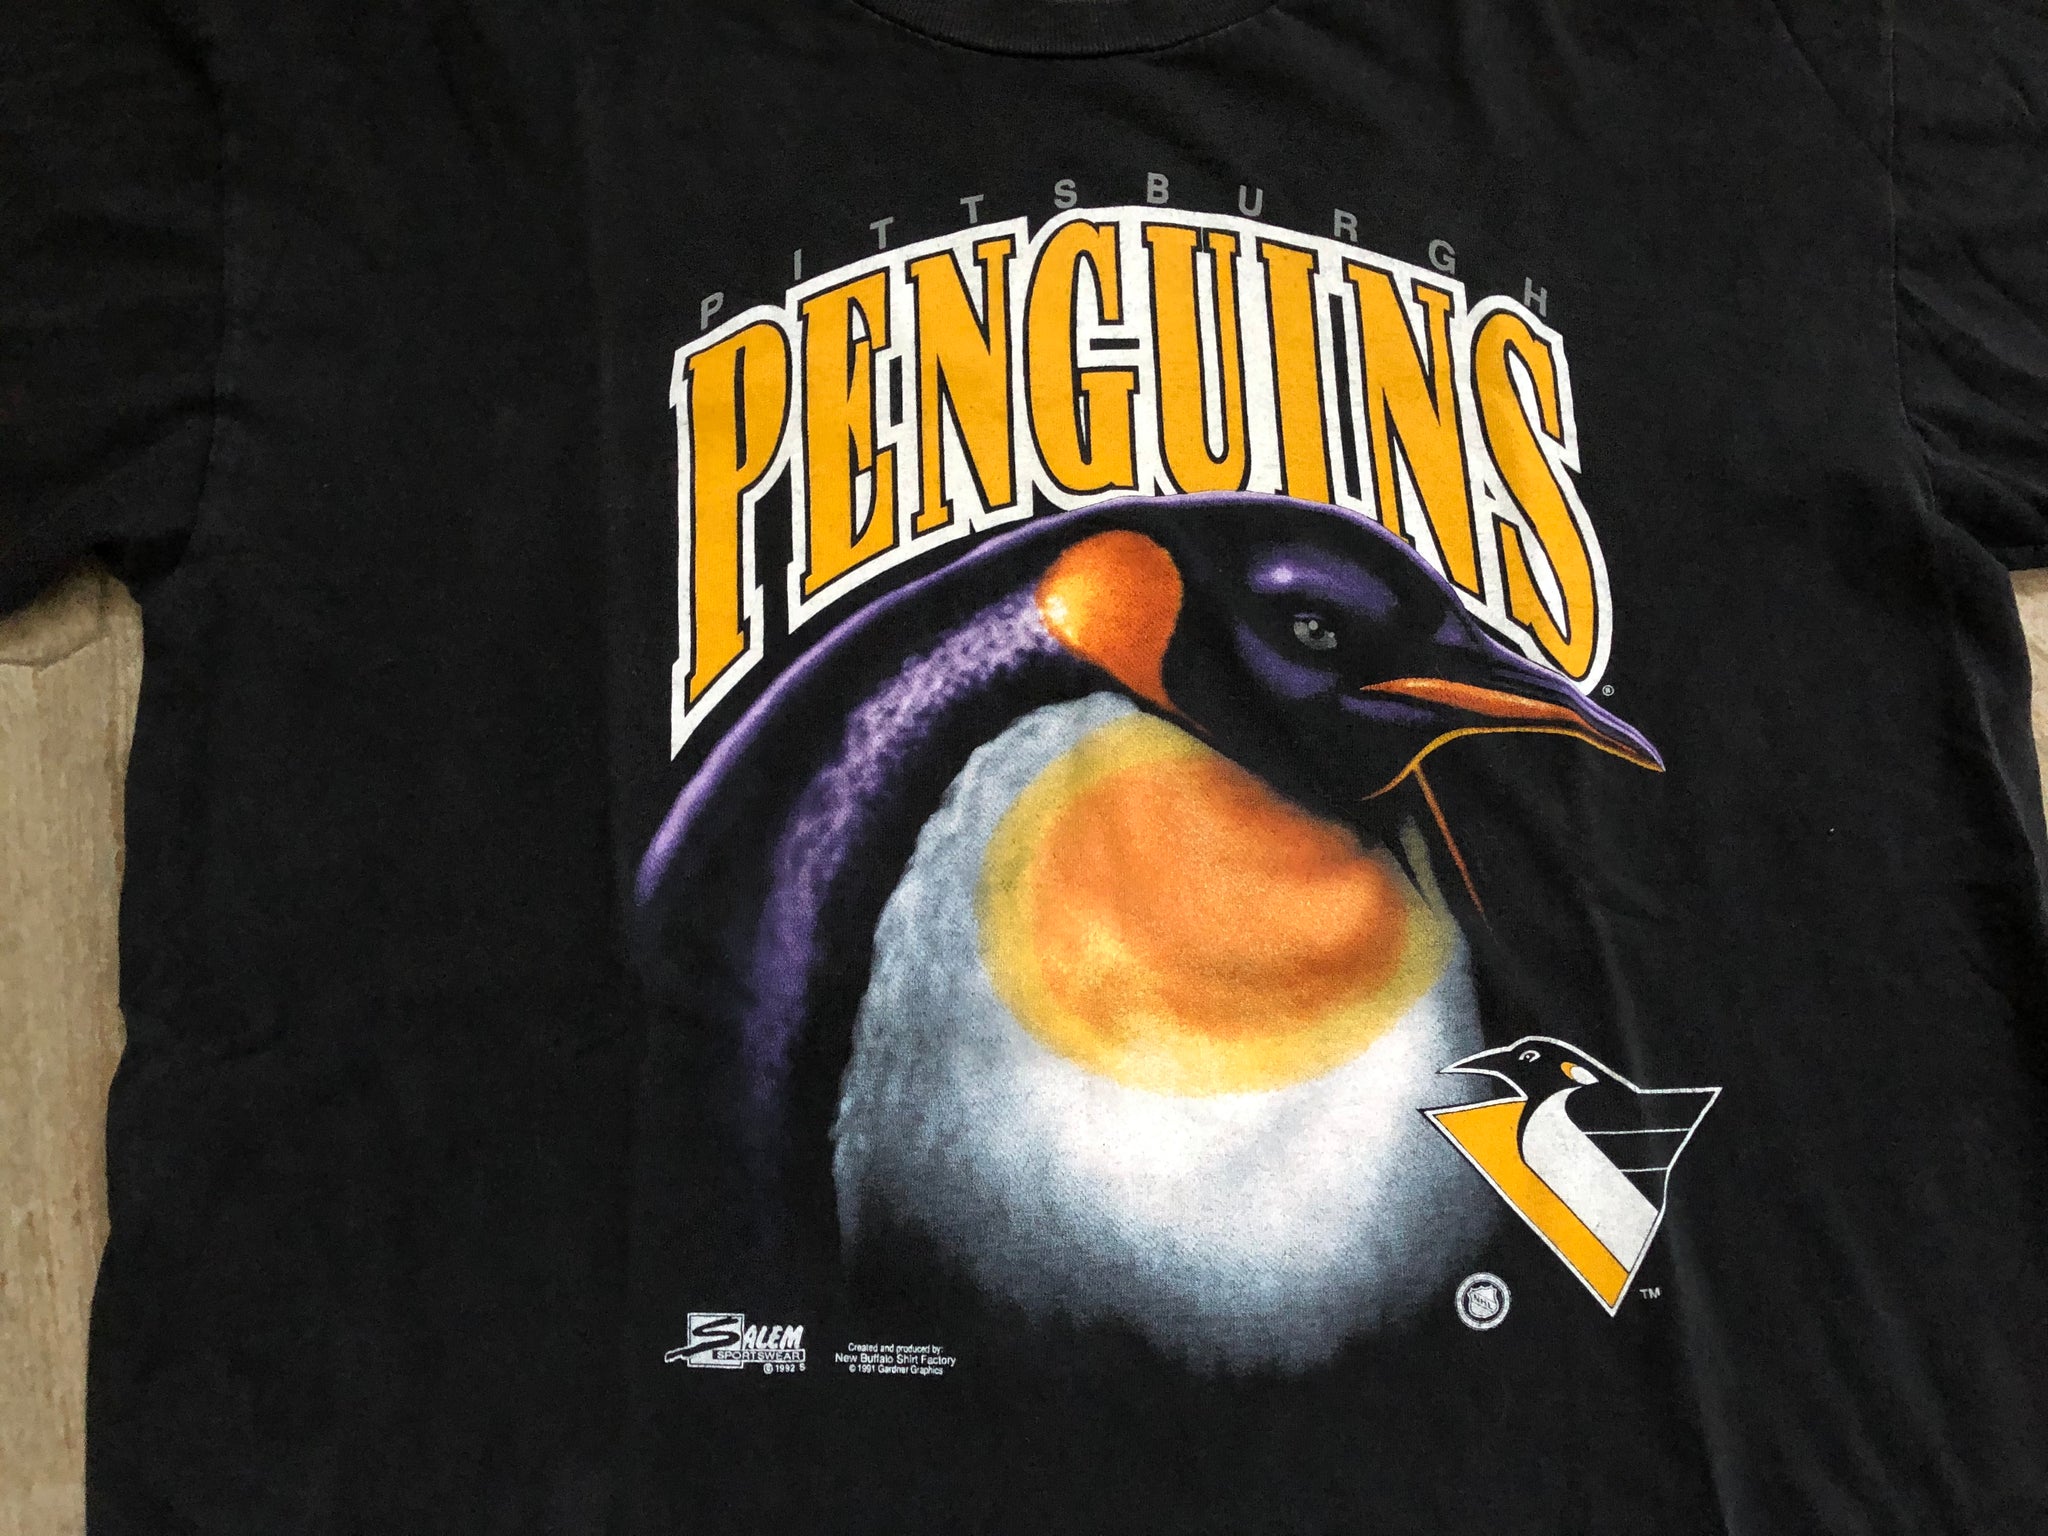 Vintage 1991 NHL Pittsburgh Penguins T-shirt Made in USA